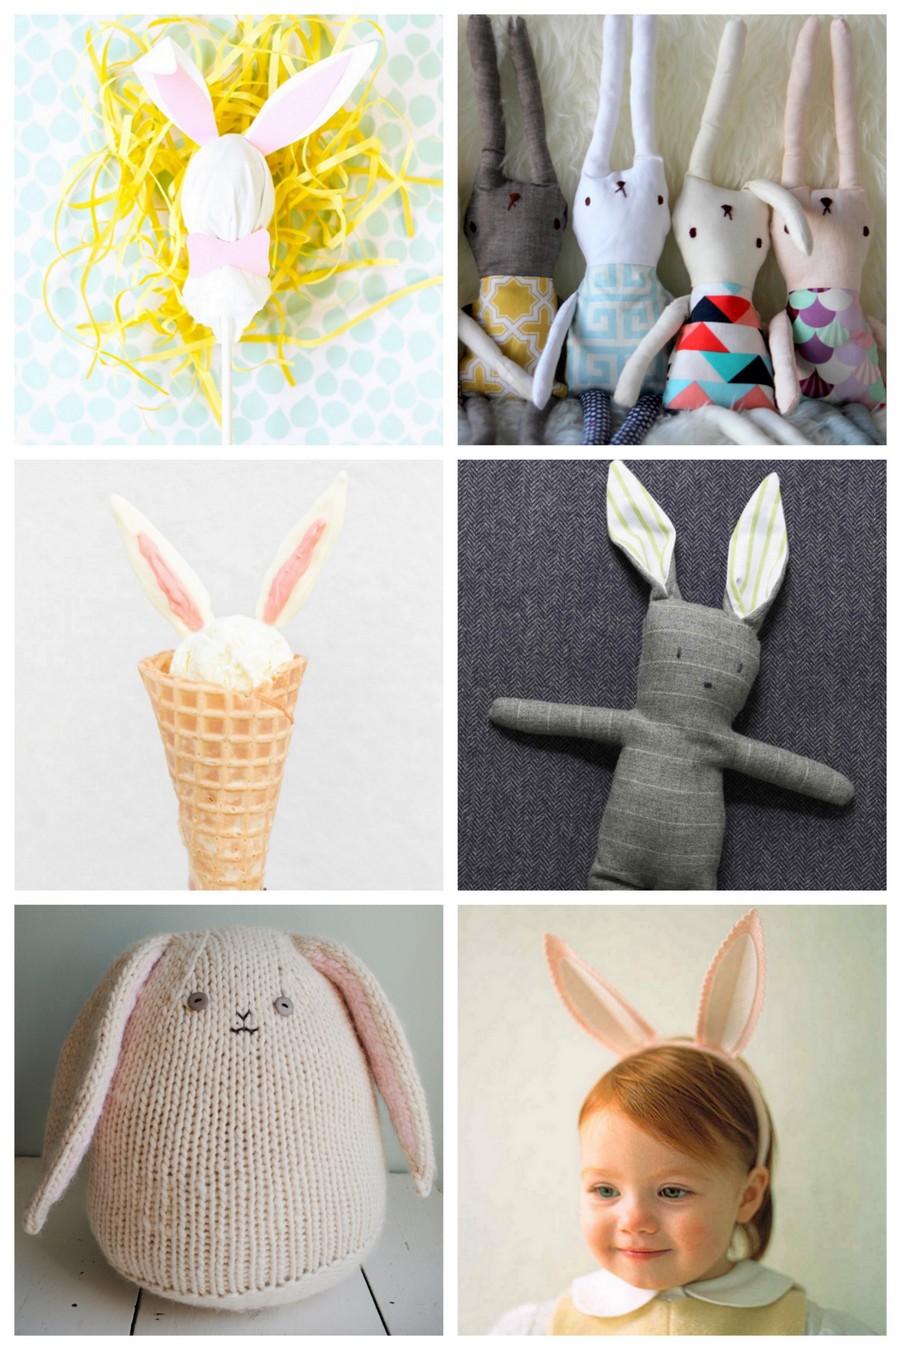 Get ready for easter baskets with these darling DIY bunny projects!